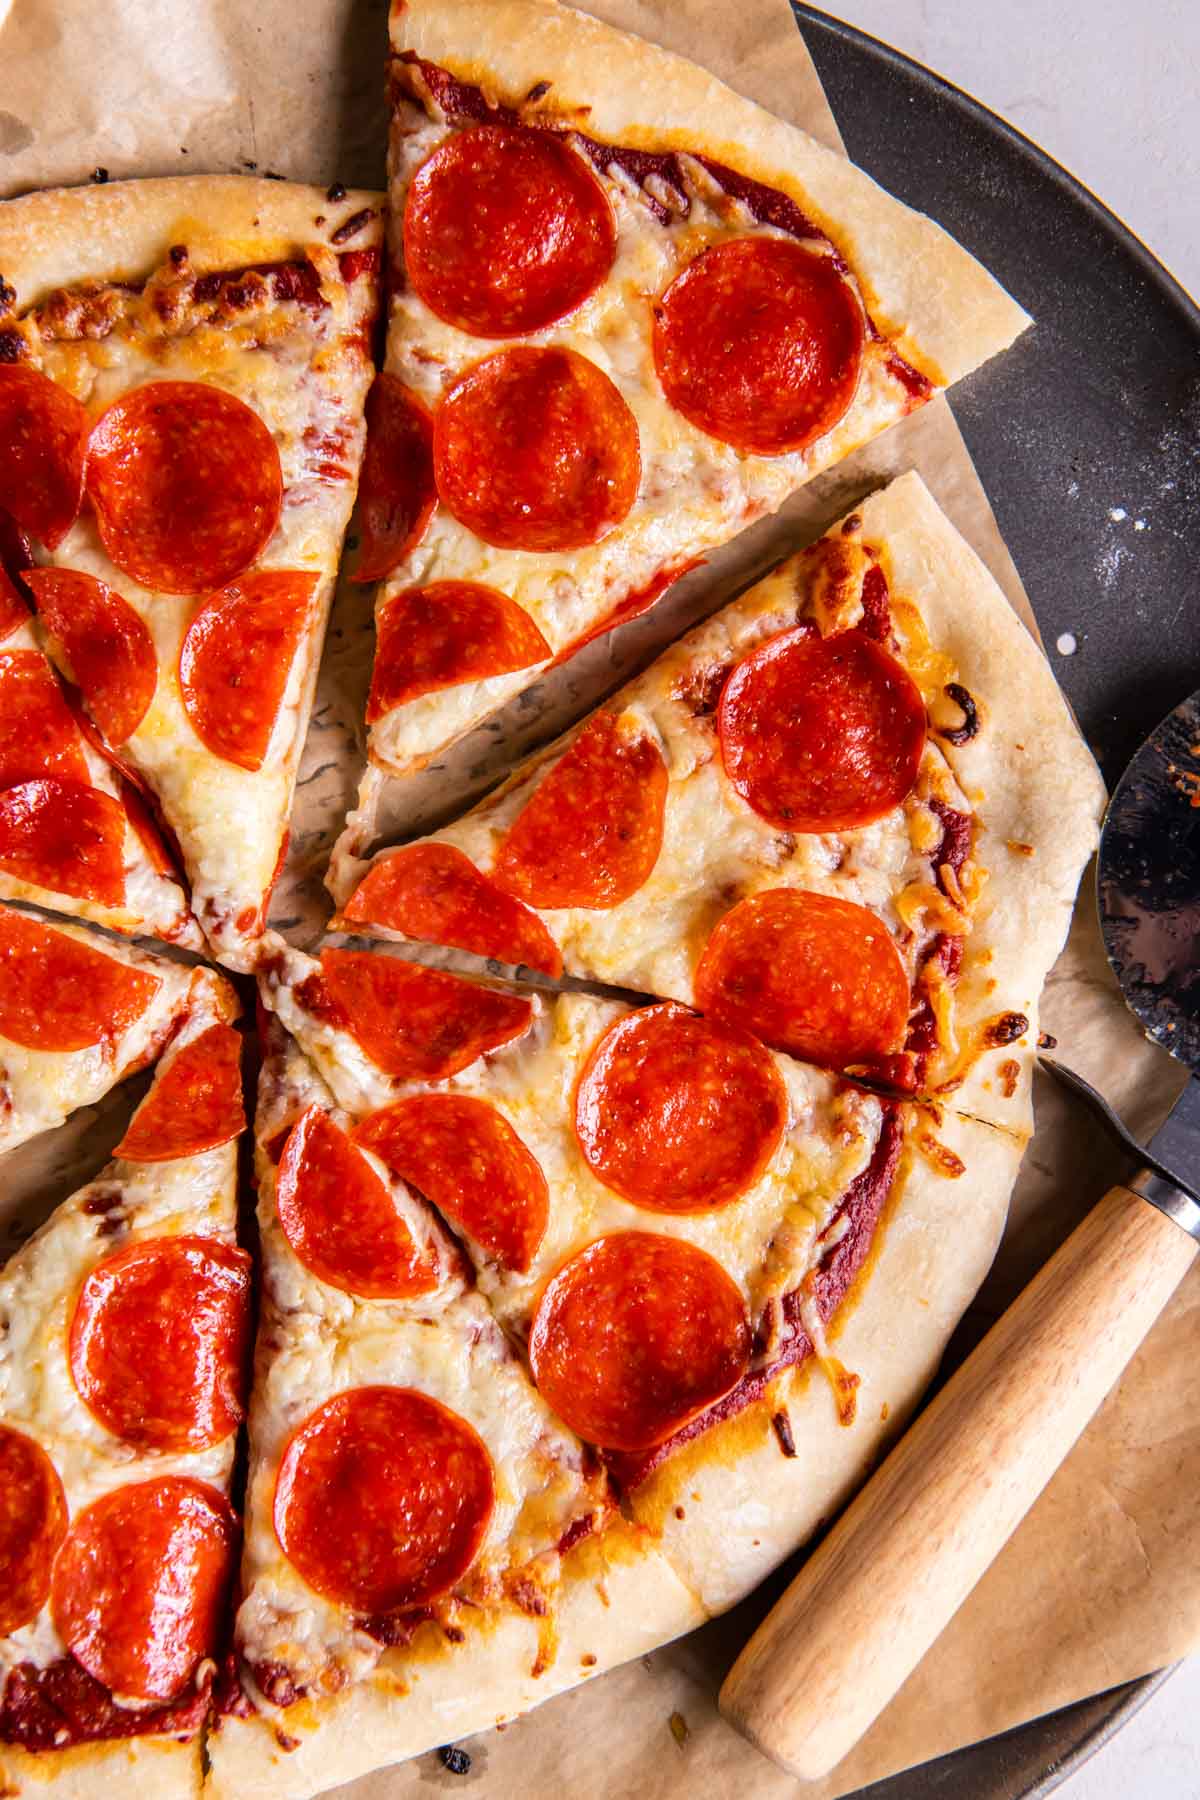 Sliced pepperoni pizza made with easy pizza dough recipe.